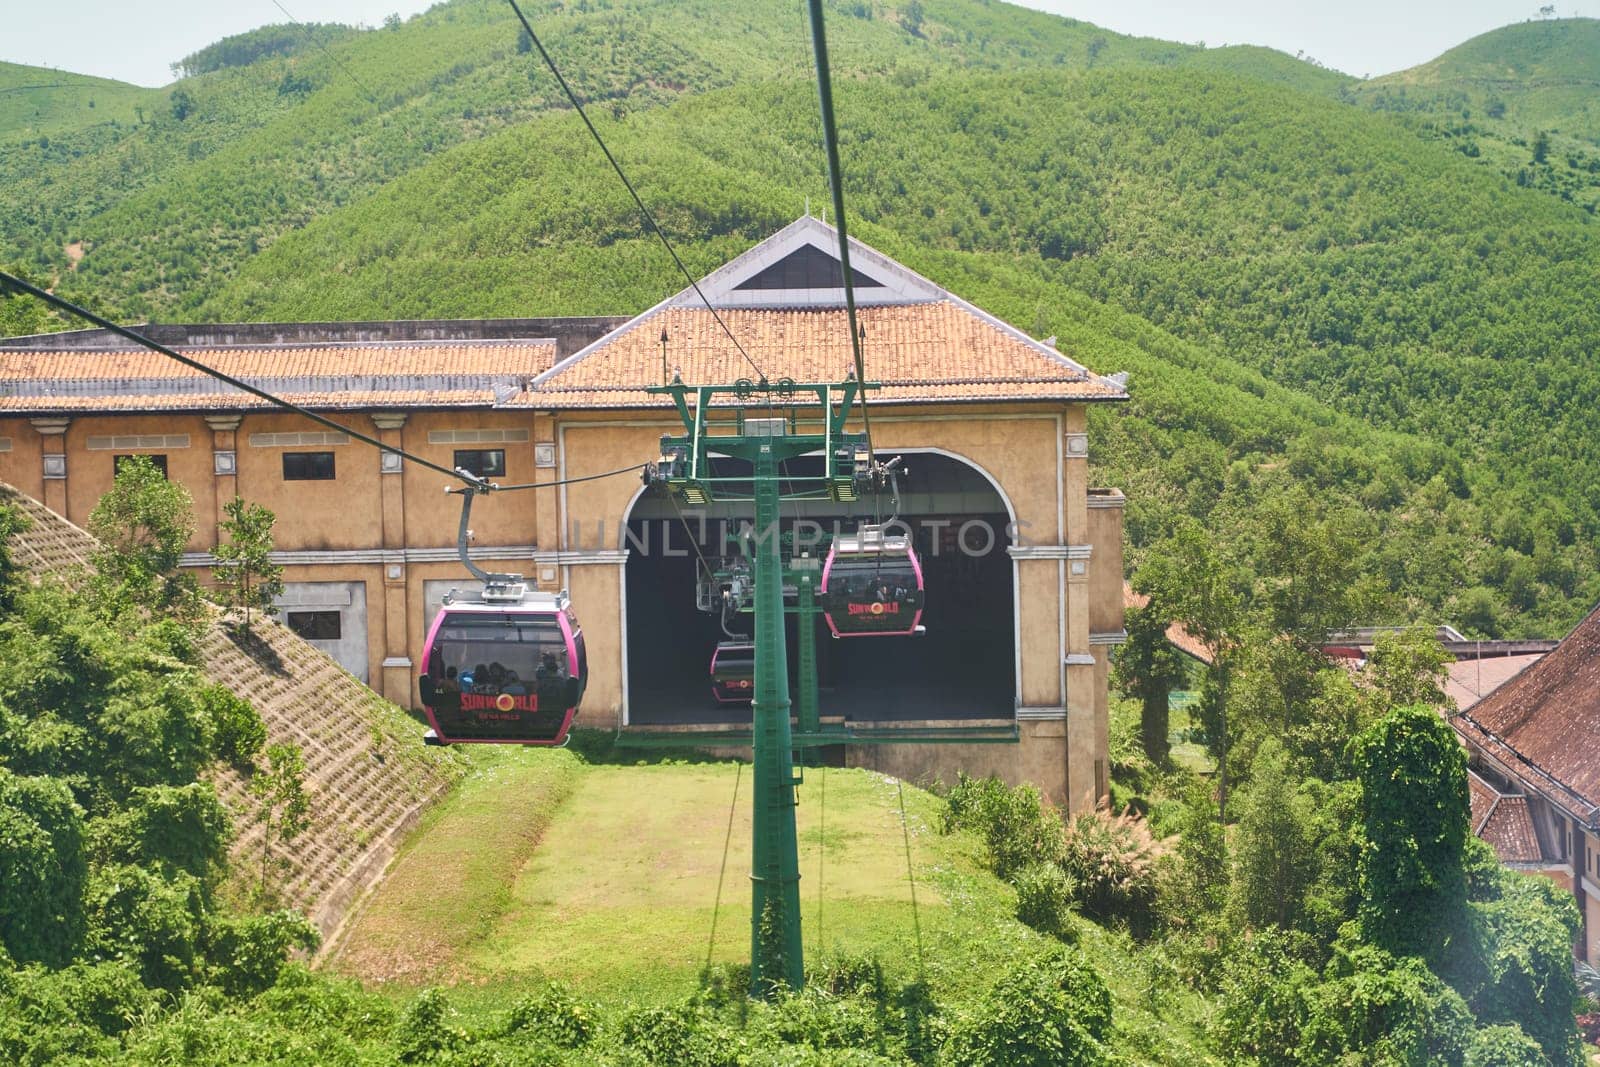 Da Nang, Vietnam - 29.06.2023: The famous and longest cable car to the French village of Ba Na Hills in Vietnam.